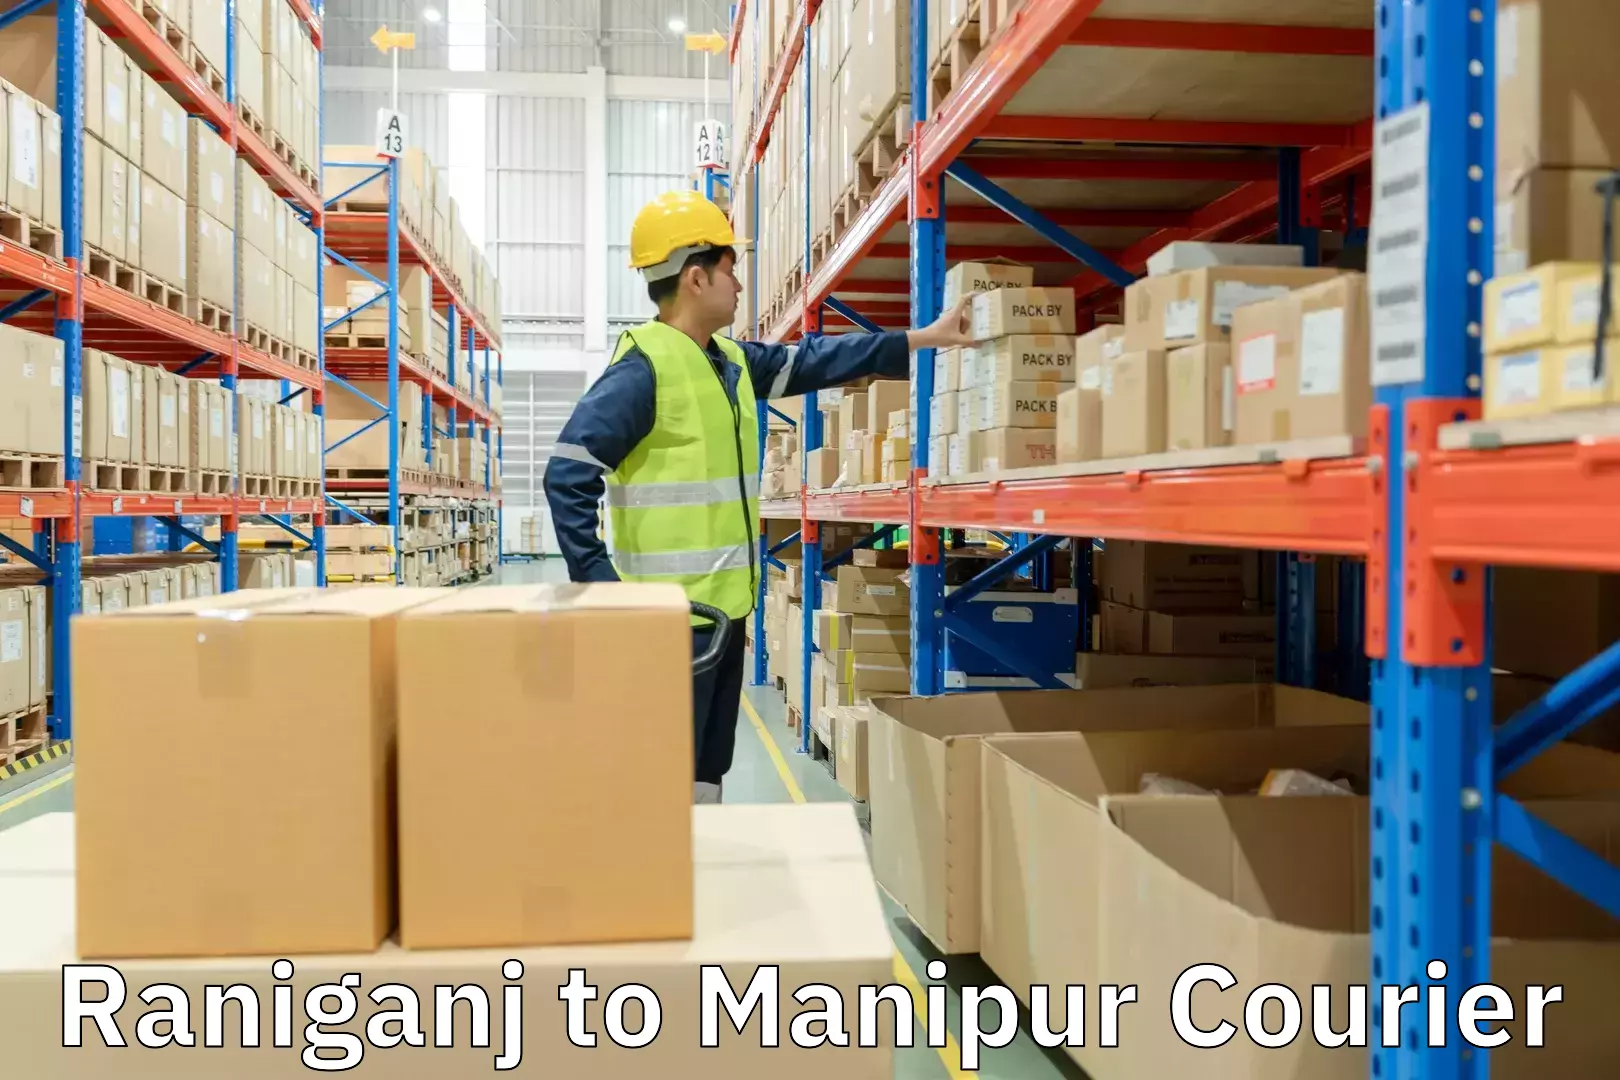 Delivery service partnership Raniganj to Manipur